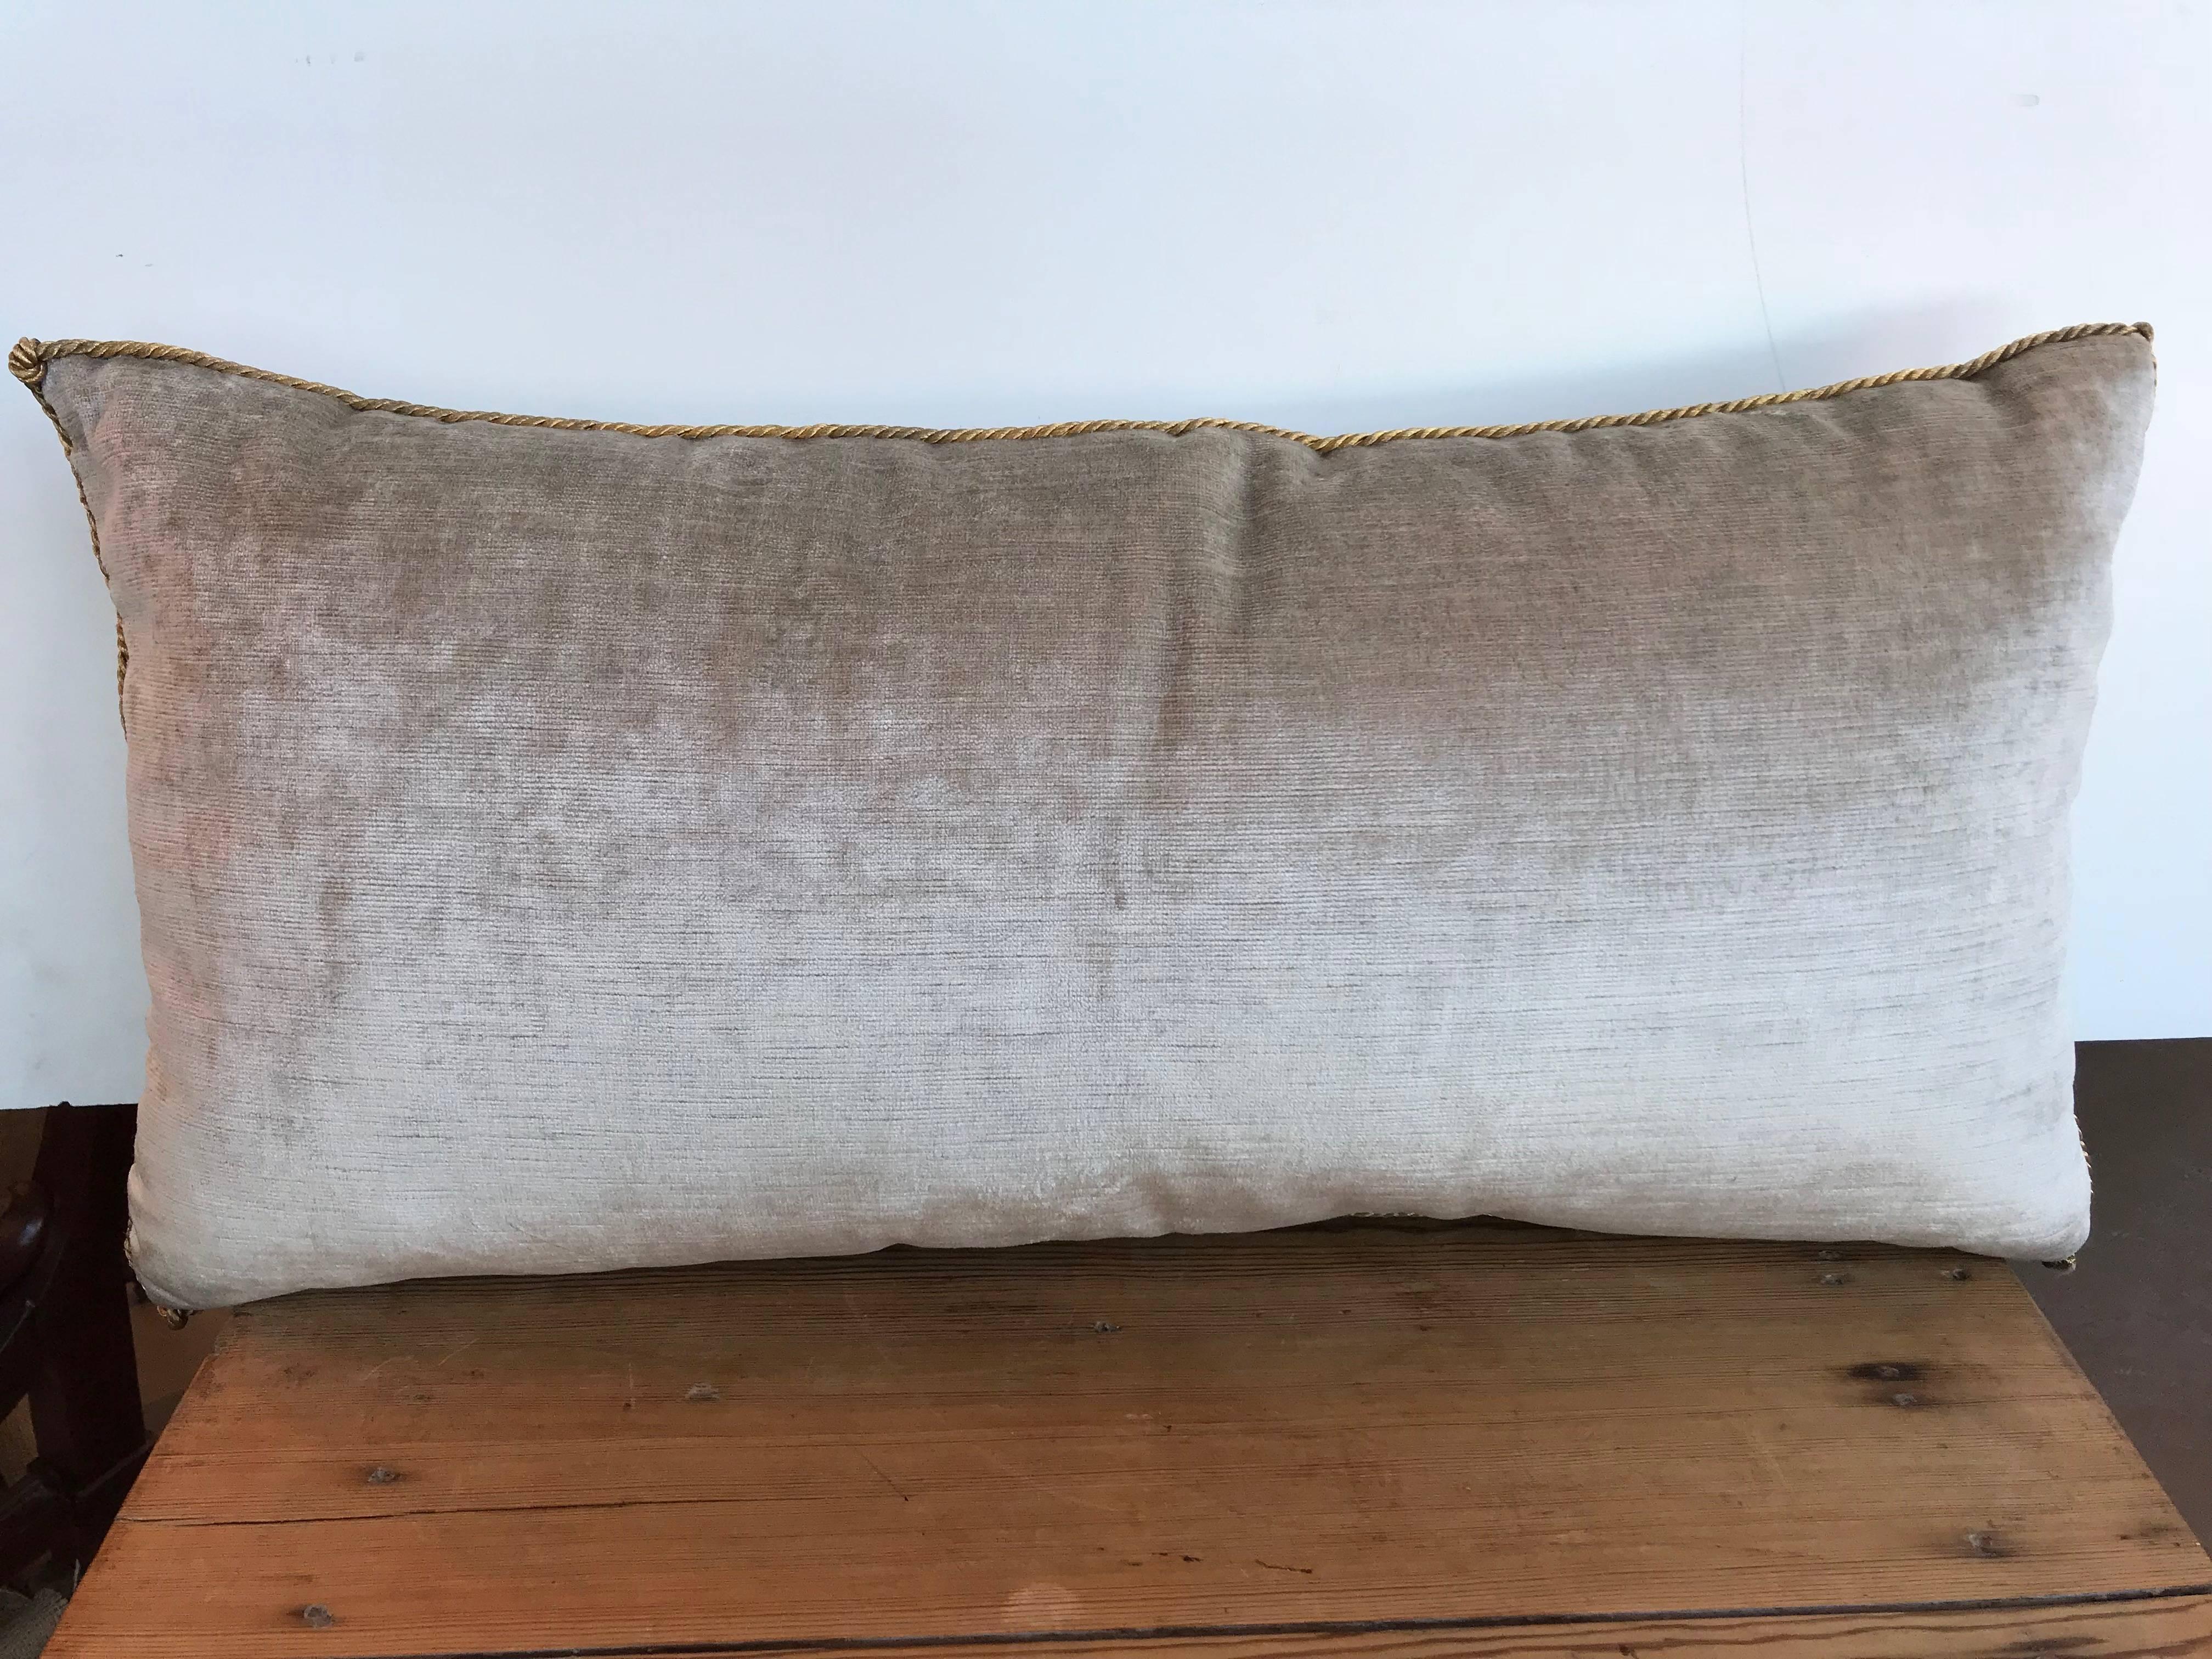 19th Century Antique European Gold Metallic Embroidery Pillow For Sale